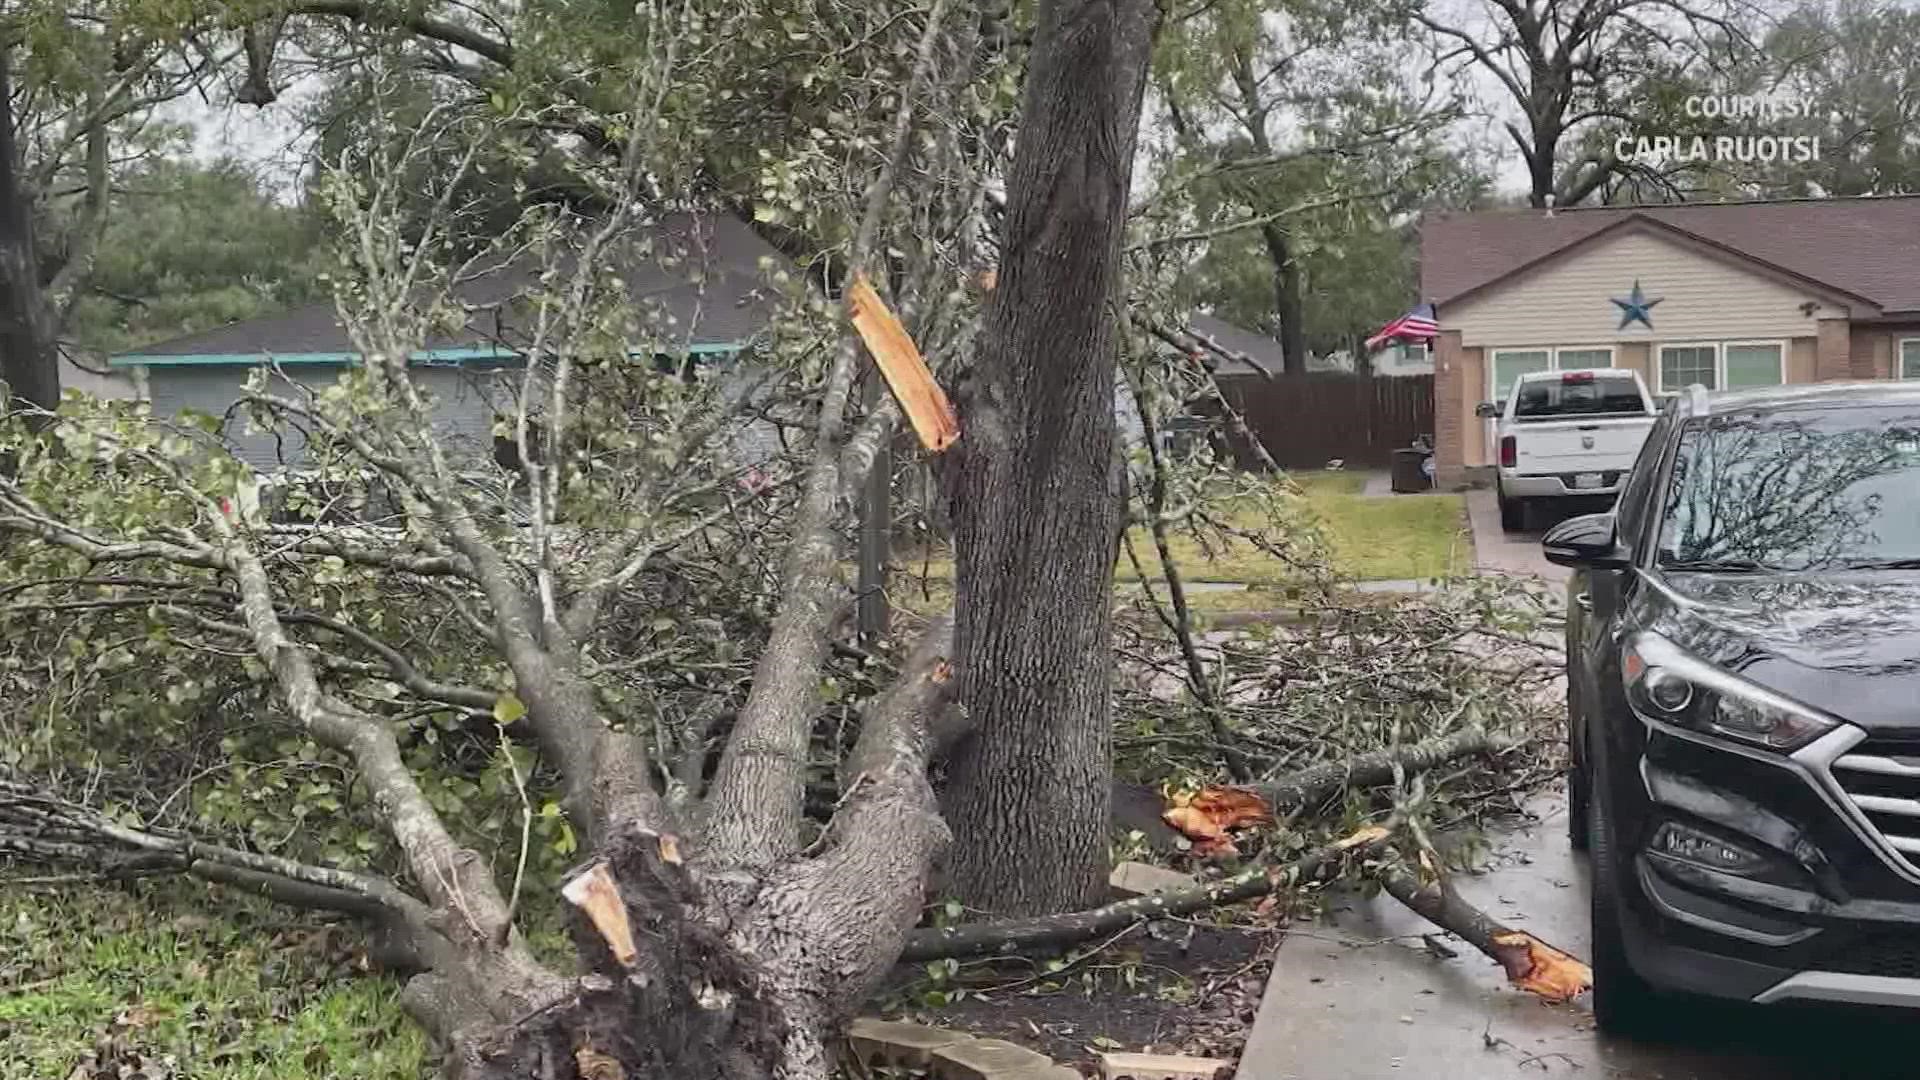 Multiple buildings were destroyed and several trees were reported are suspected tornadoes in both Humble and Montgomery County. Power lines are also down.